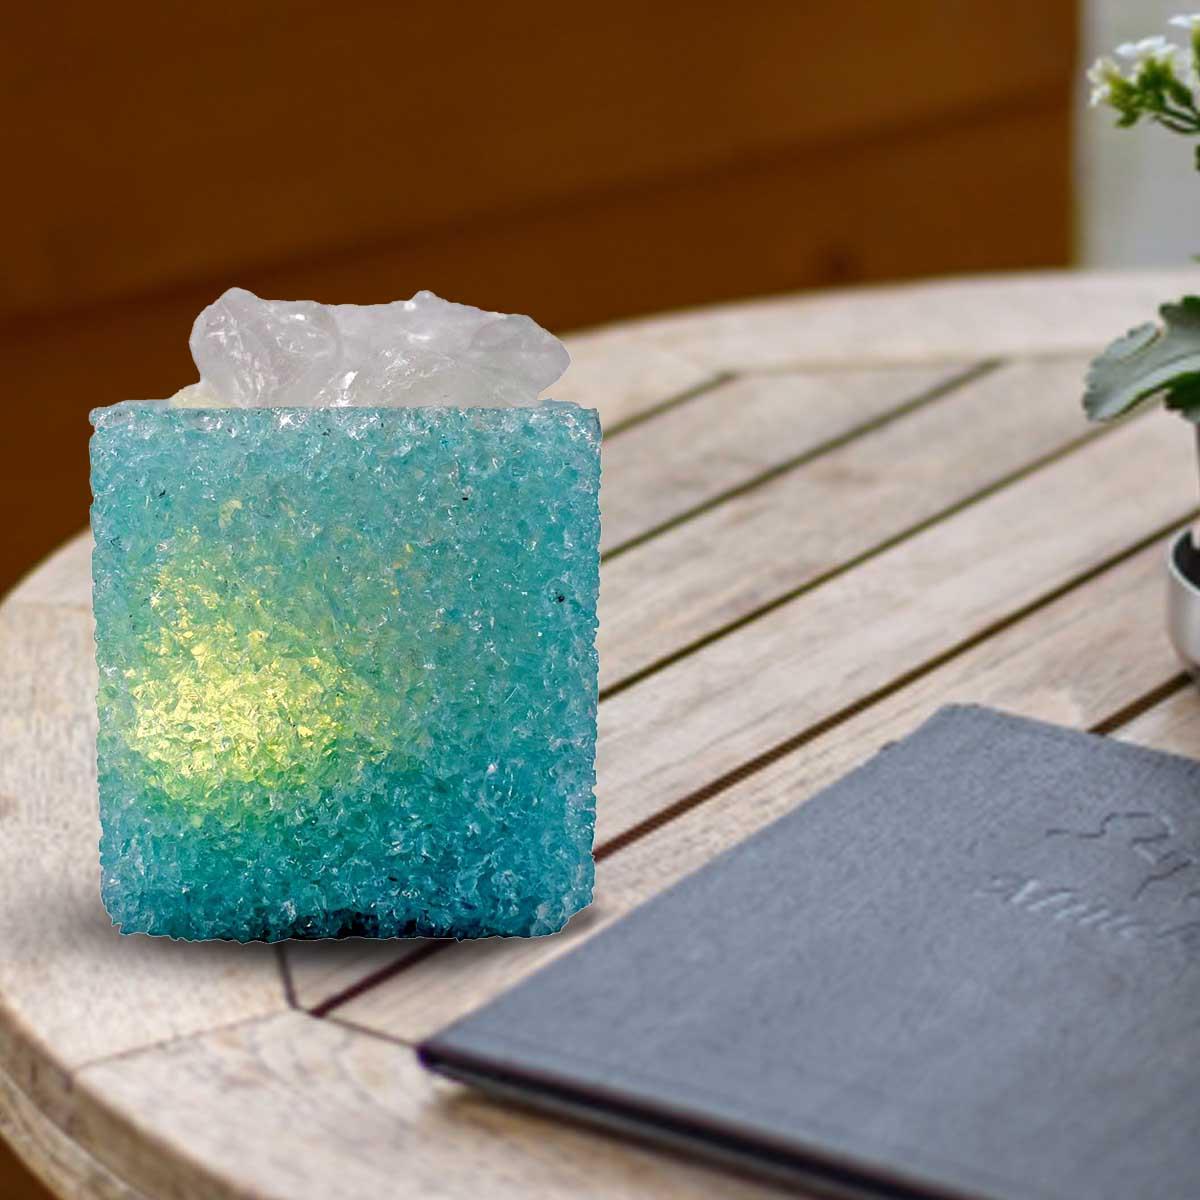 Kookee Natural Crystal Aromatherapy with Essential Oil, Electric Diffuser and LED Light Suitable for Home, Office, Spa for Claming, Soothing and Relaxing (087-1-F)